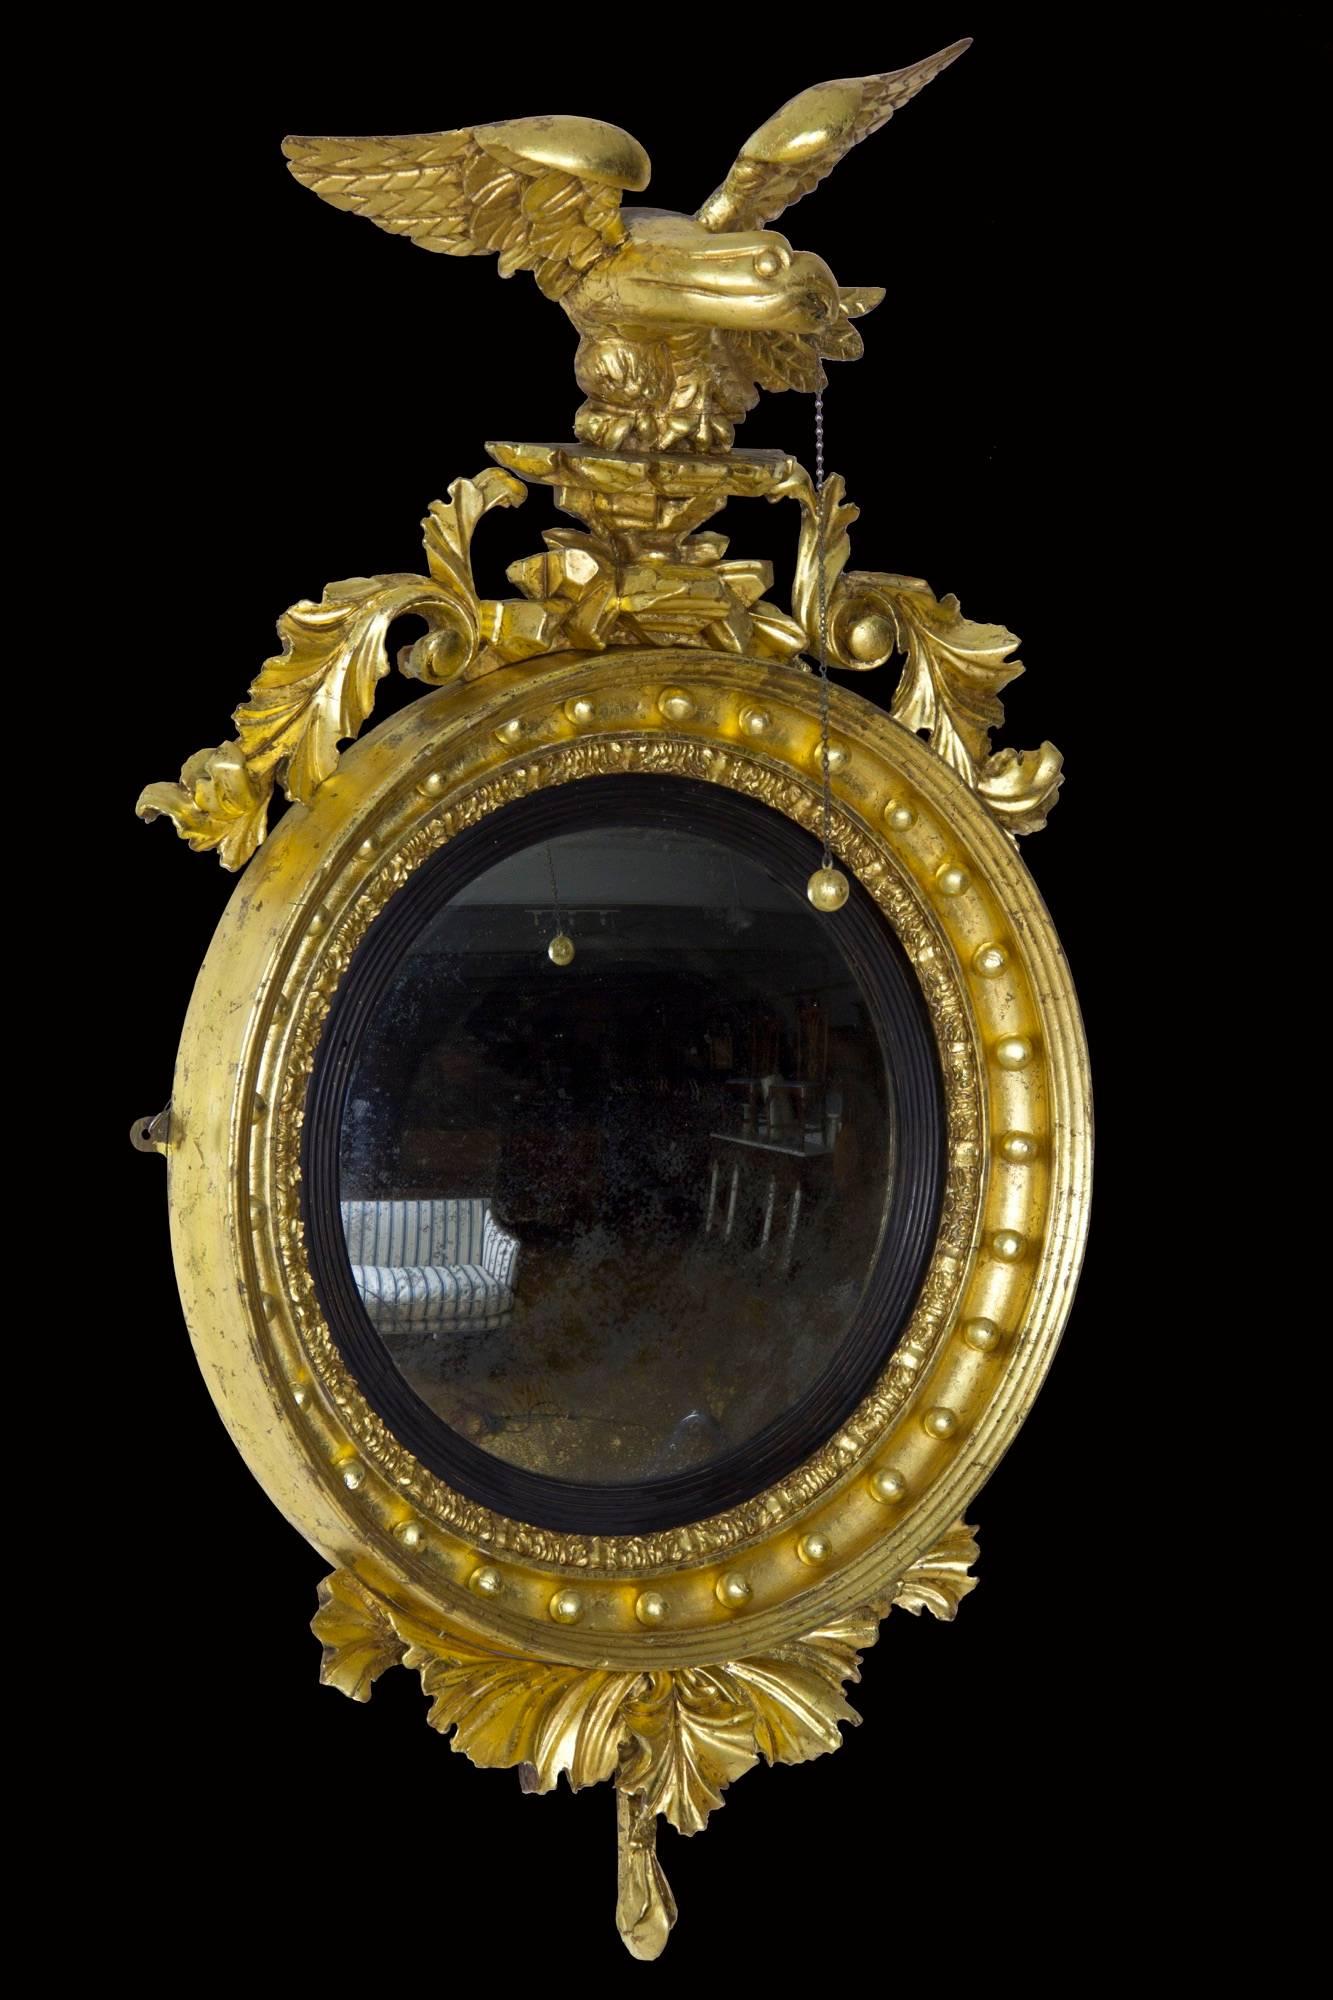 American Classical Classical Giltwood Girandole Mirror or Carved Eagle, English or American